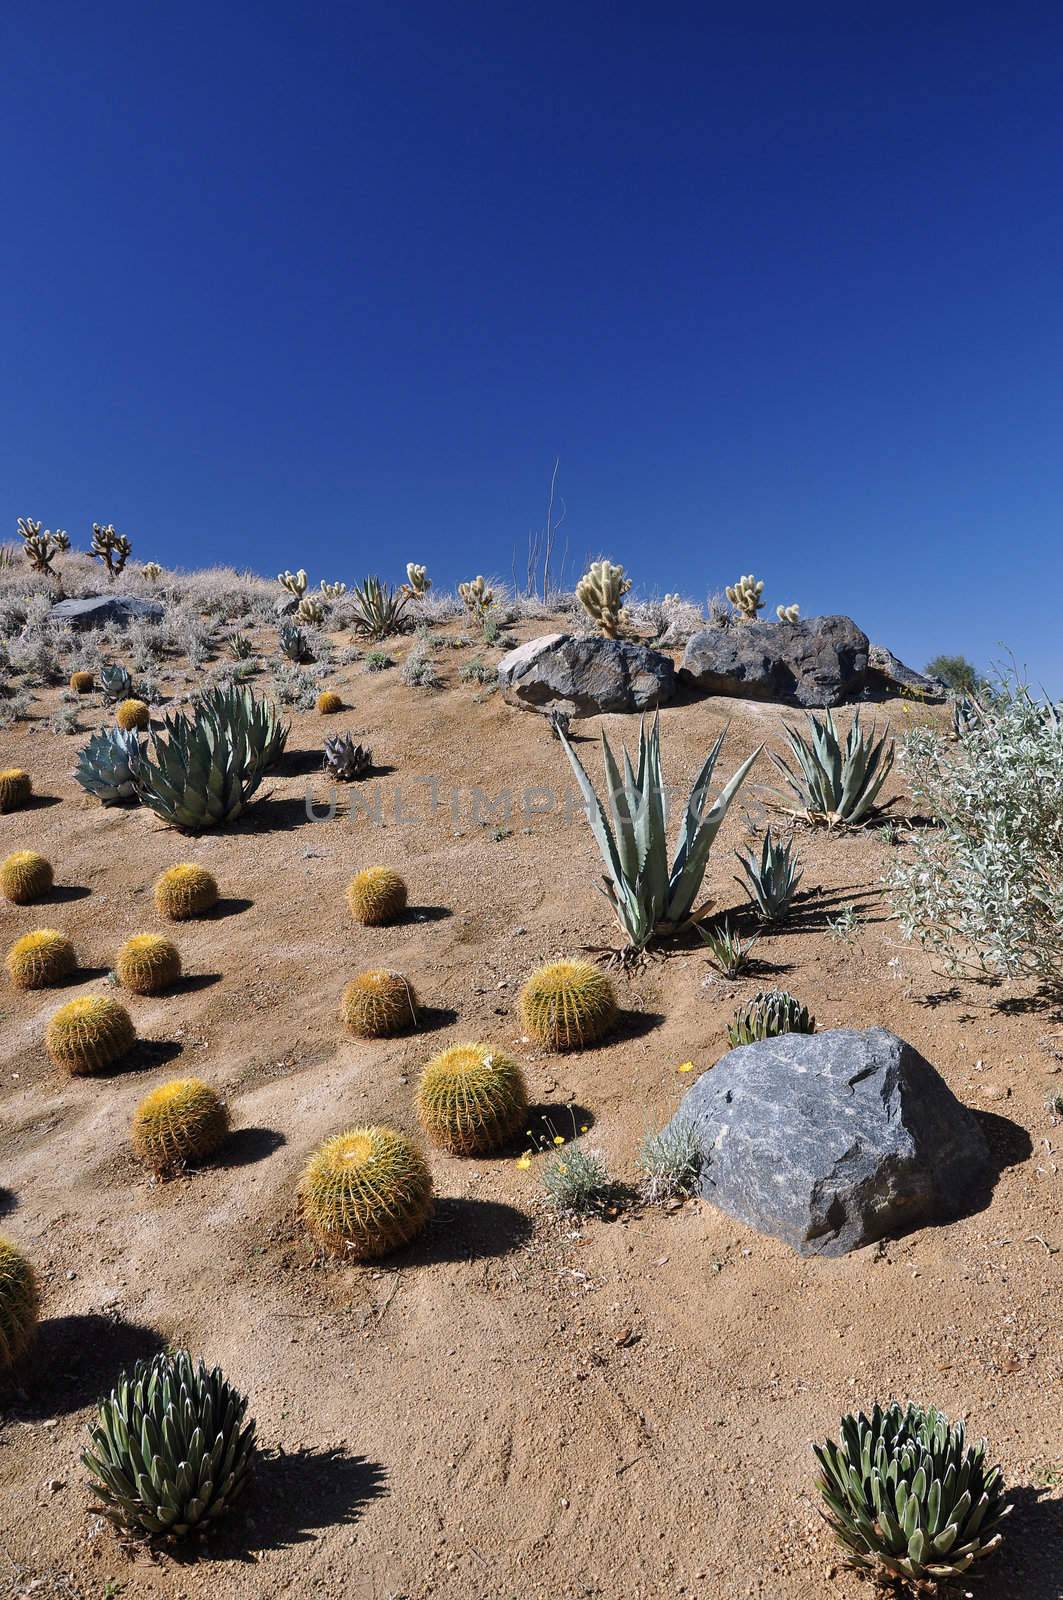 A variety of cactus grows on this hillside near Palm Springs, California.